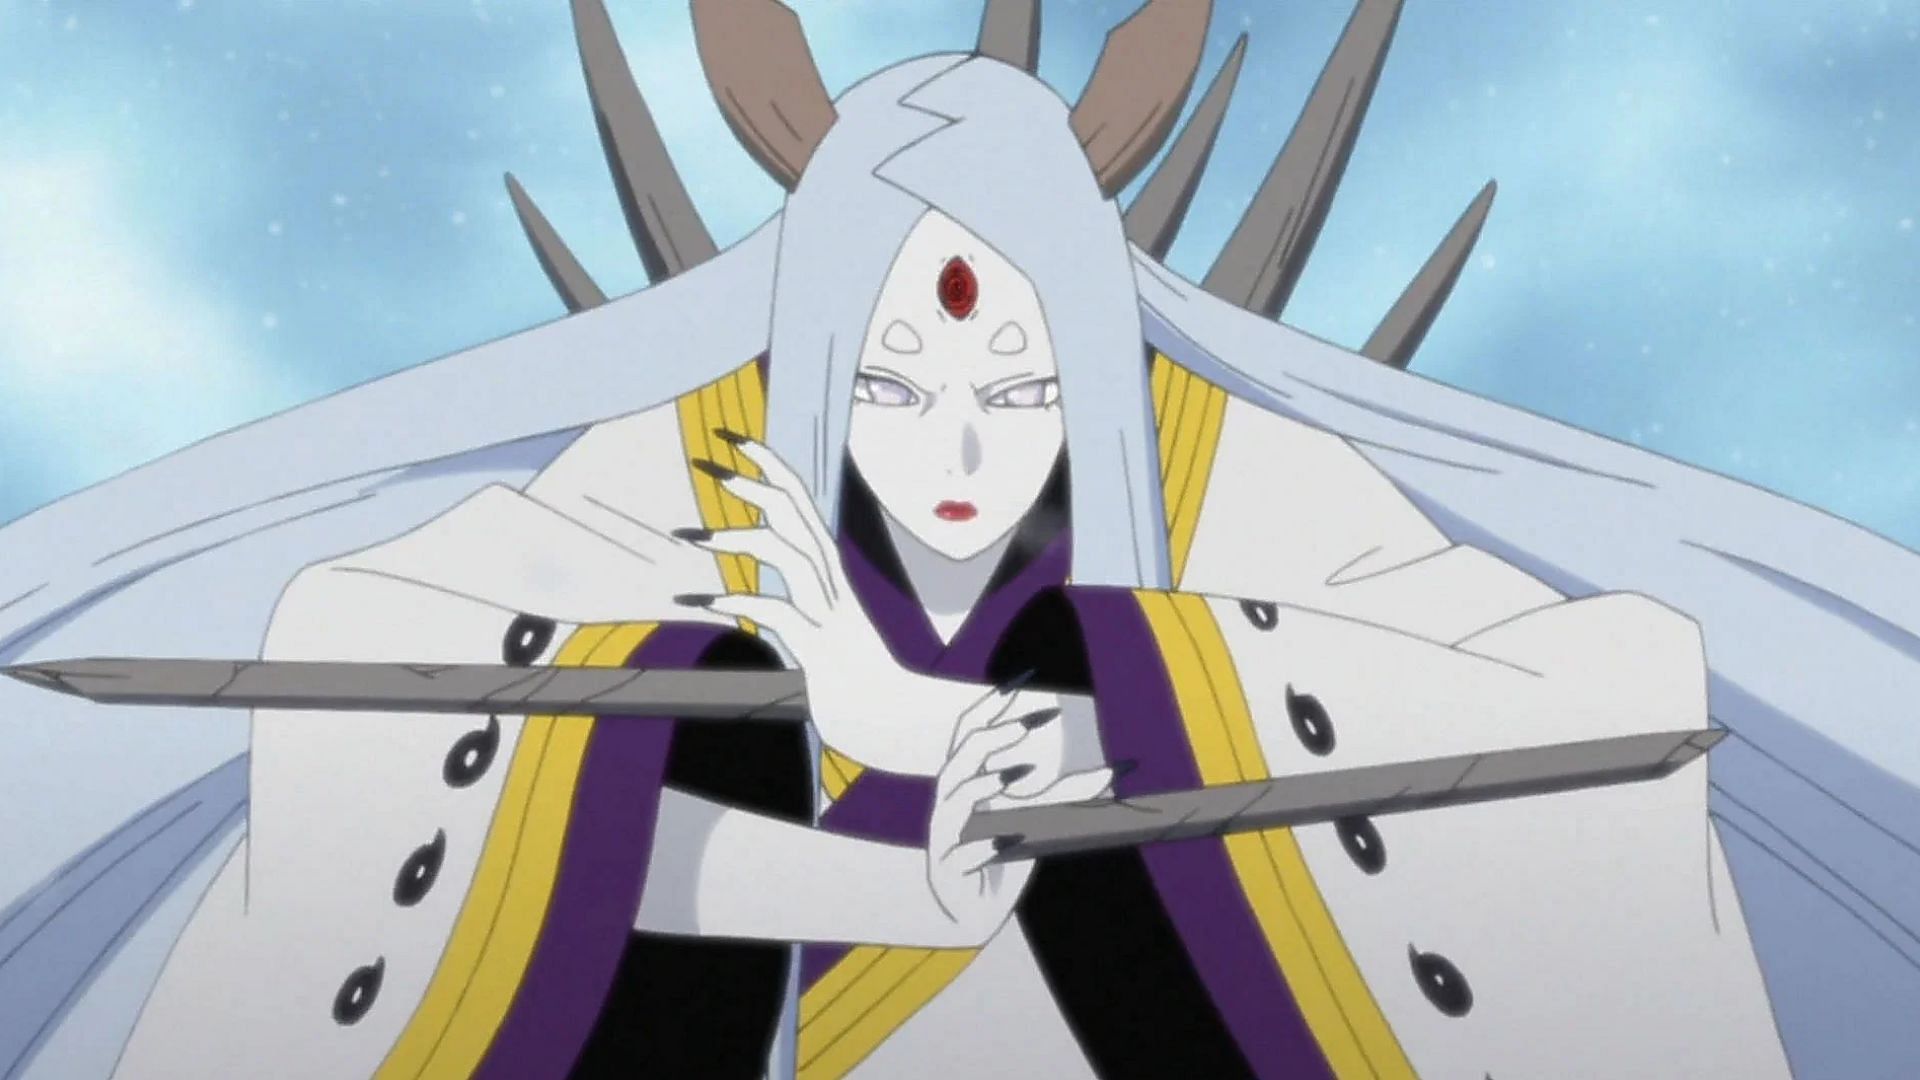 Kaguya, a holder of the strongest anime character title (Image via Pierrot)